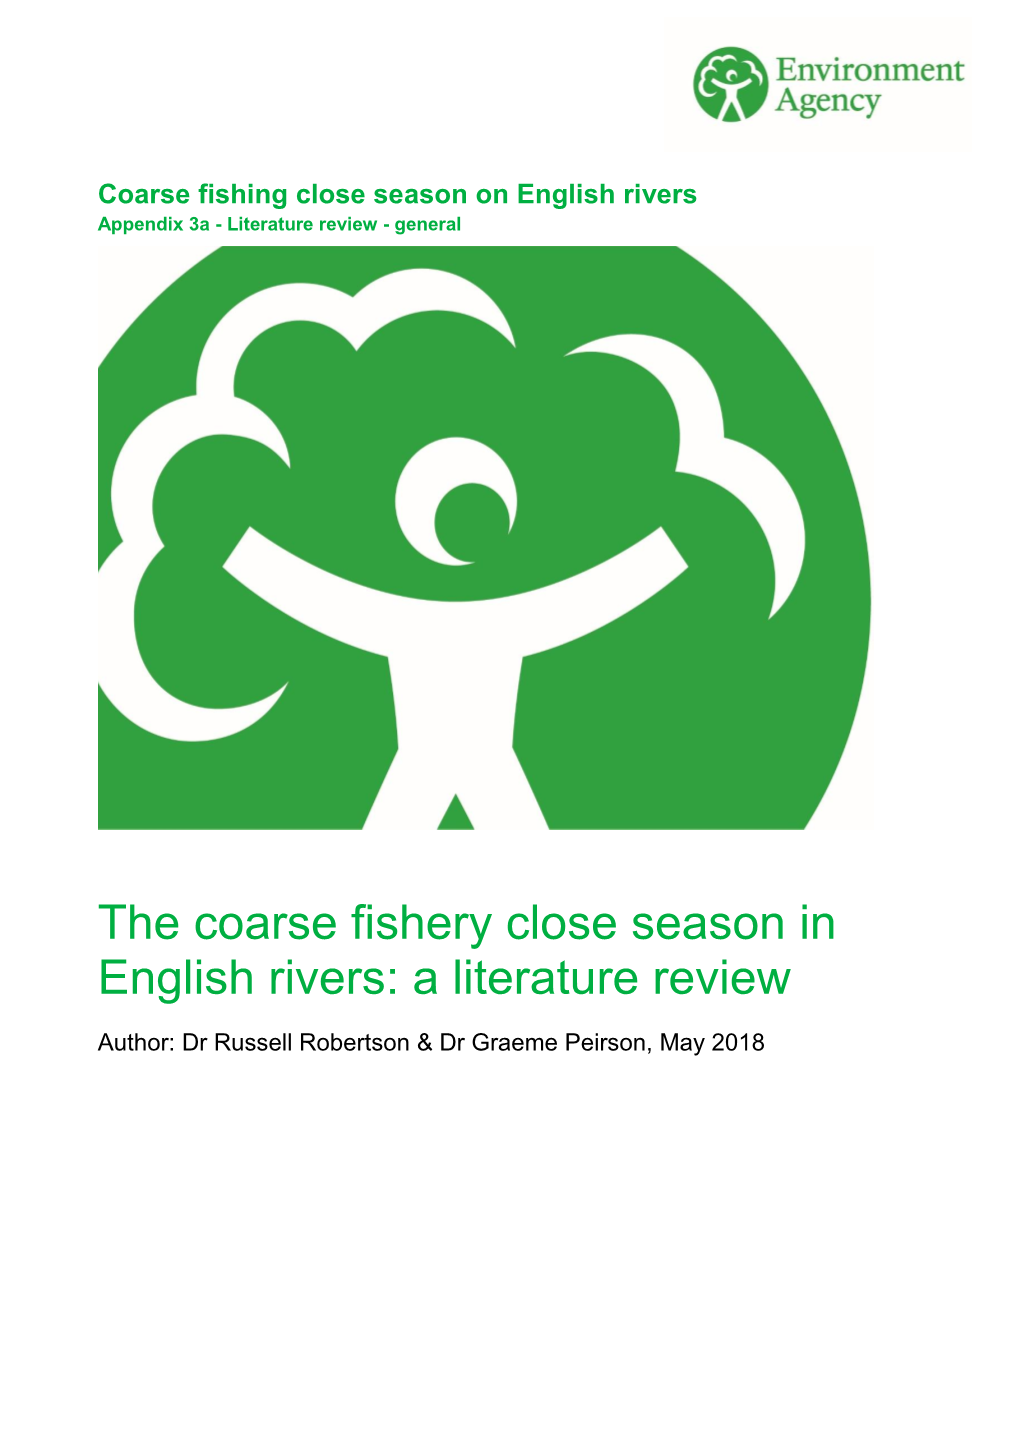 The Coarse Fishery Close Season in English Rivers: a Literature Review